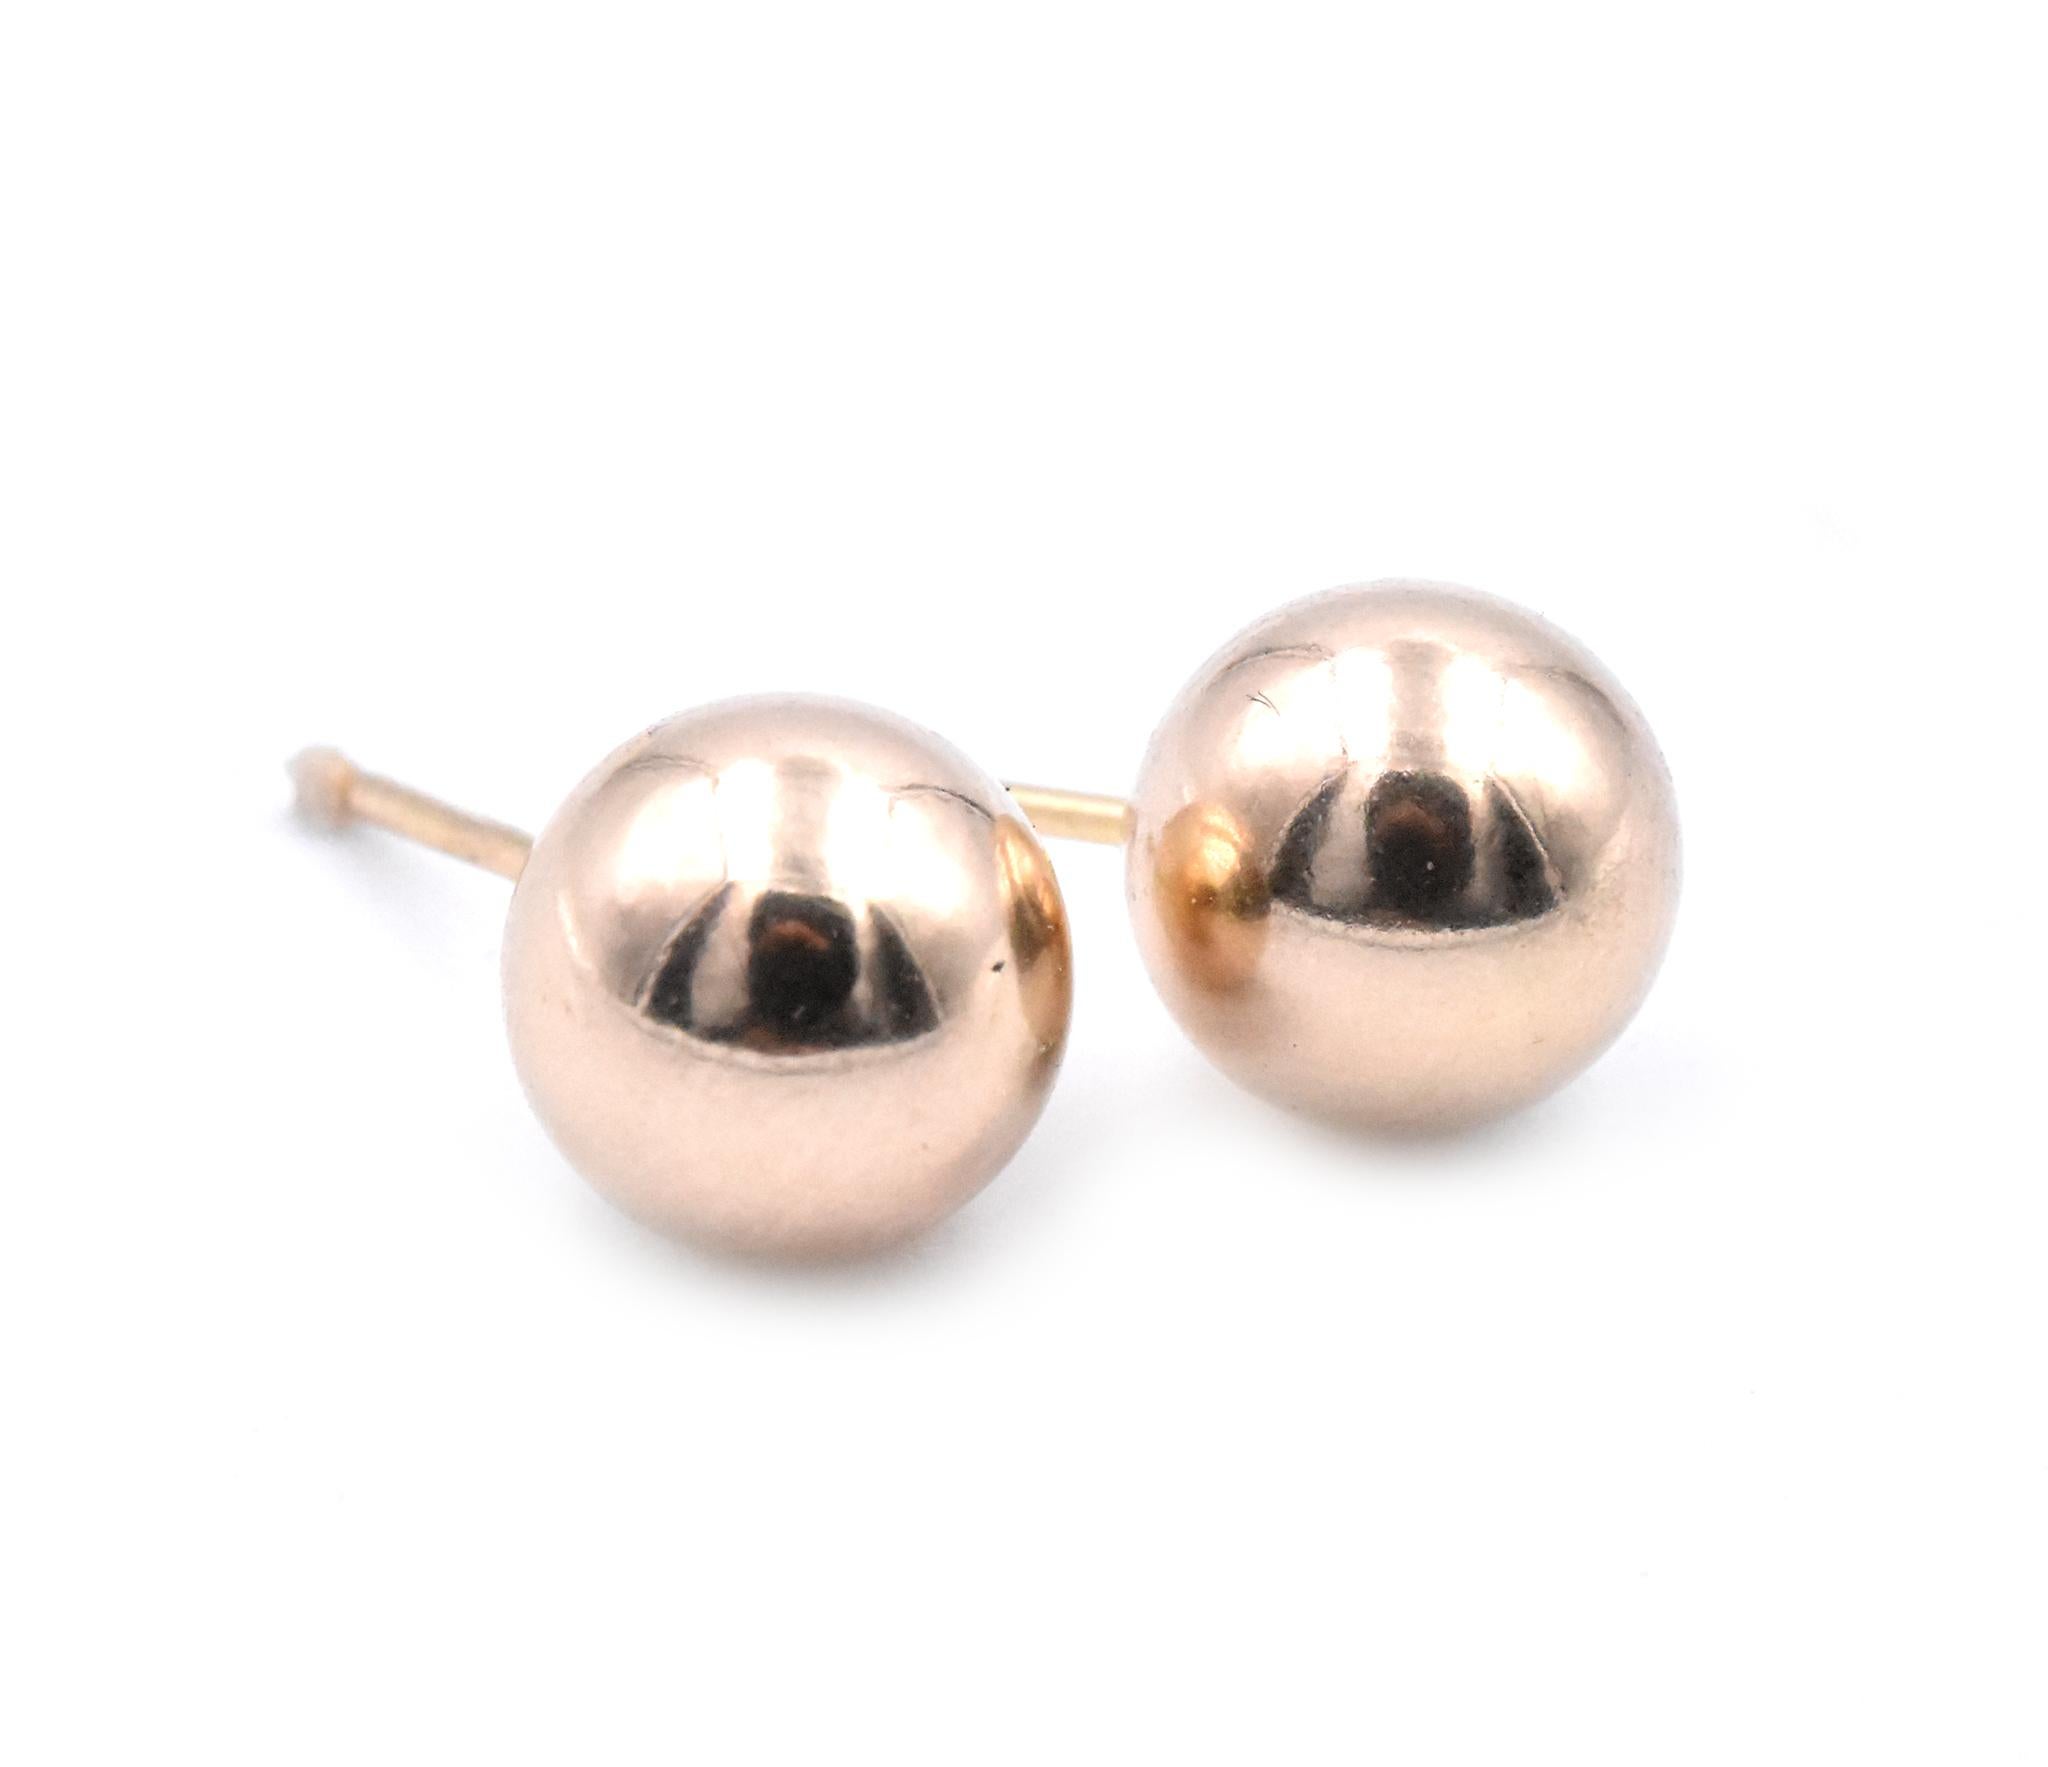 Designer: Custom
Material: 14k yellow gold
Dimensions: earrings measure 7.75mm in diameter
Fastenings: post with friction back
Weight: 0.93 grams
